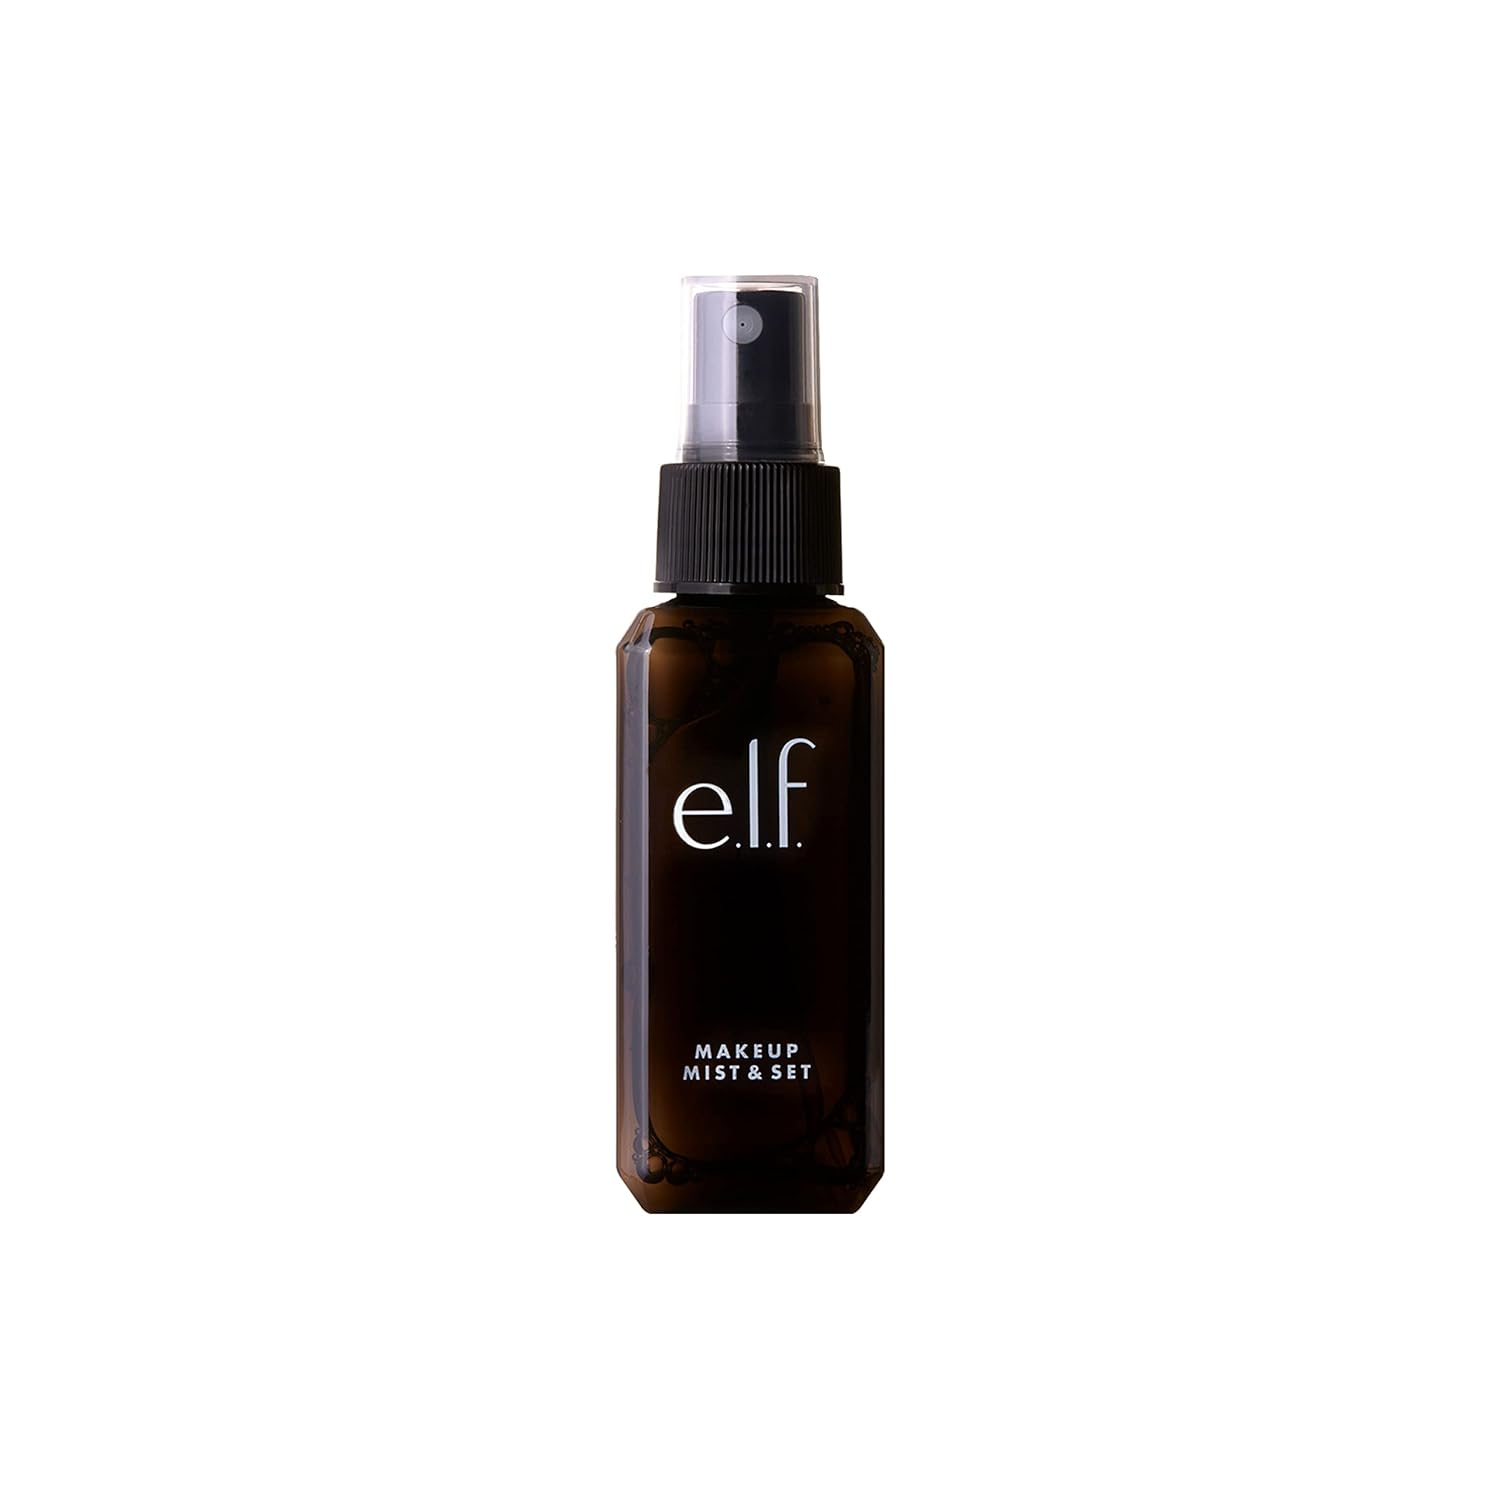 e.l.f., Makeup Mist & Set - Small, Lightweight, Long Lasting, All-Day Wear, Revitalizes, Refreshes, Hydrates, Soothes, Infused with Aloe, Green Tea and Cucumber, 2.02